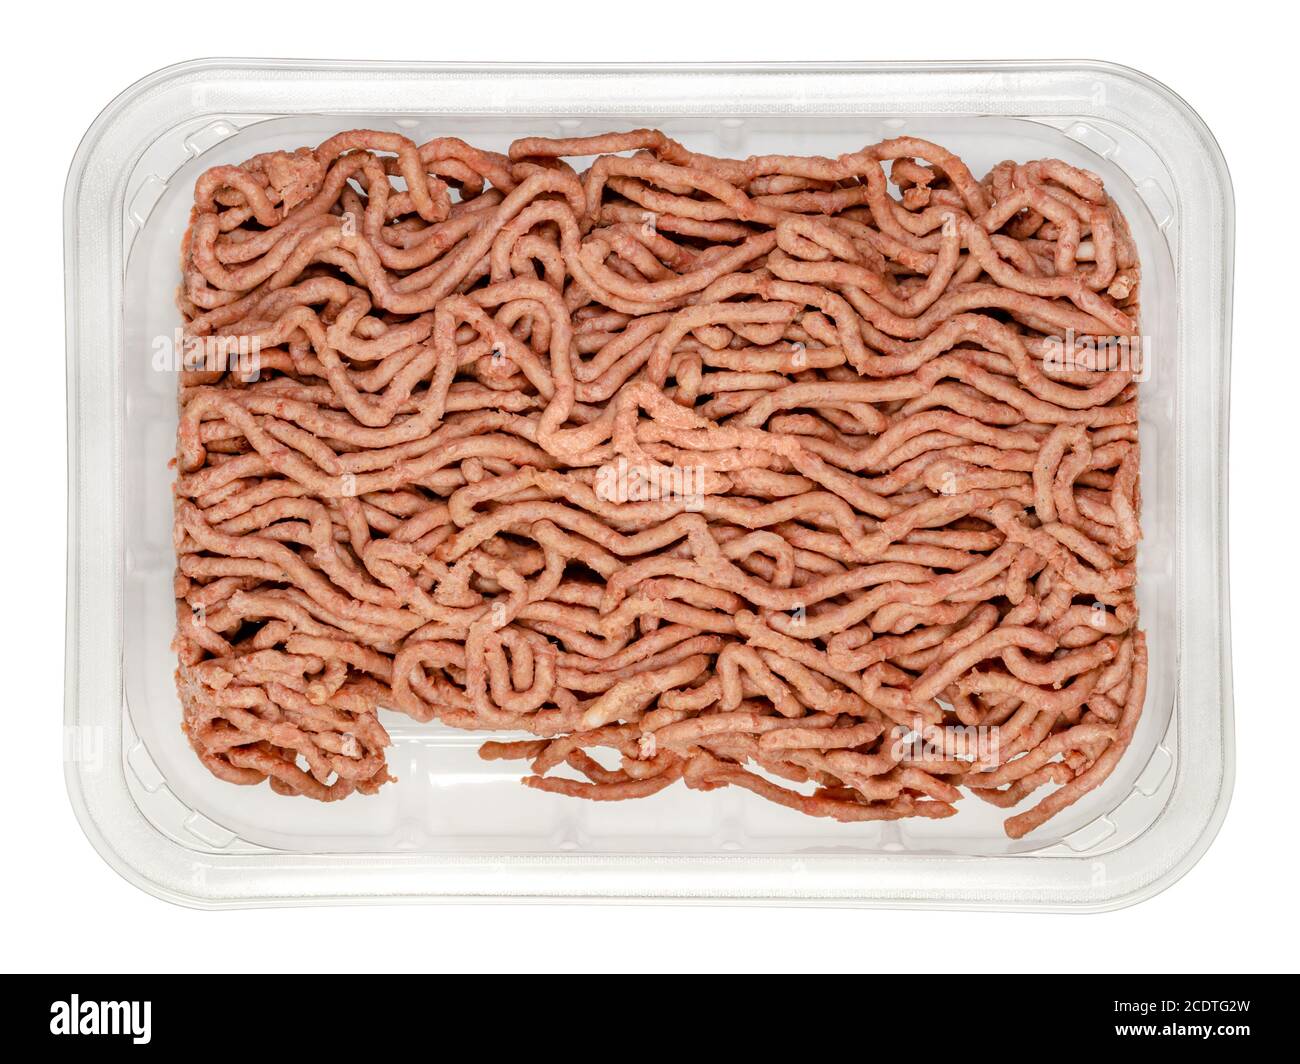 Vegan ground meat in a plastic tray. Substitute for minced meat based on pea protein, with onions and spices. Meat alternative. Close-up, from above. Stock Photo